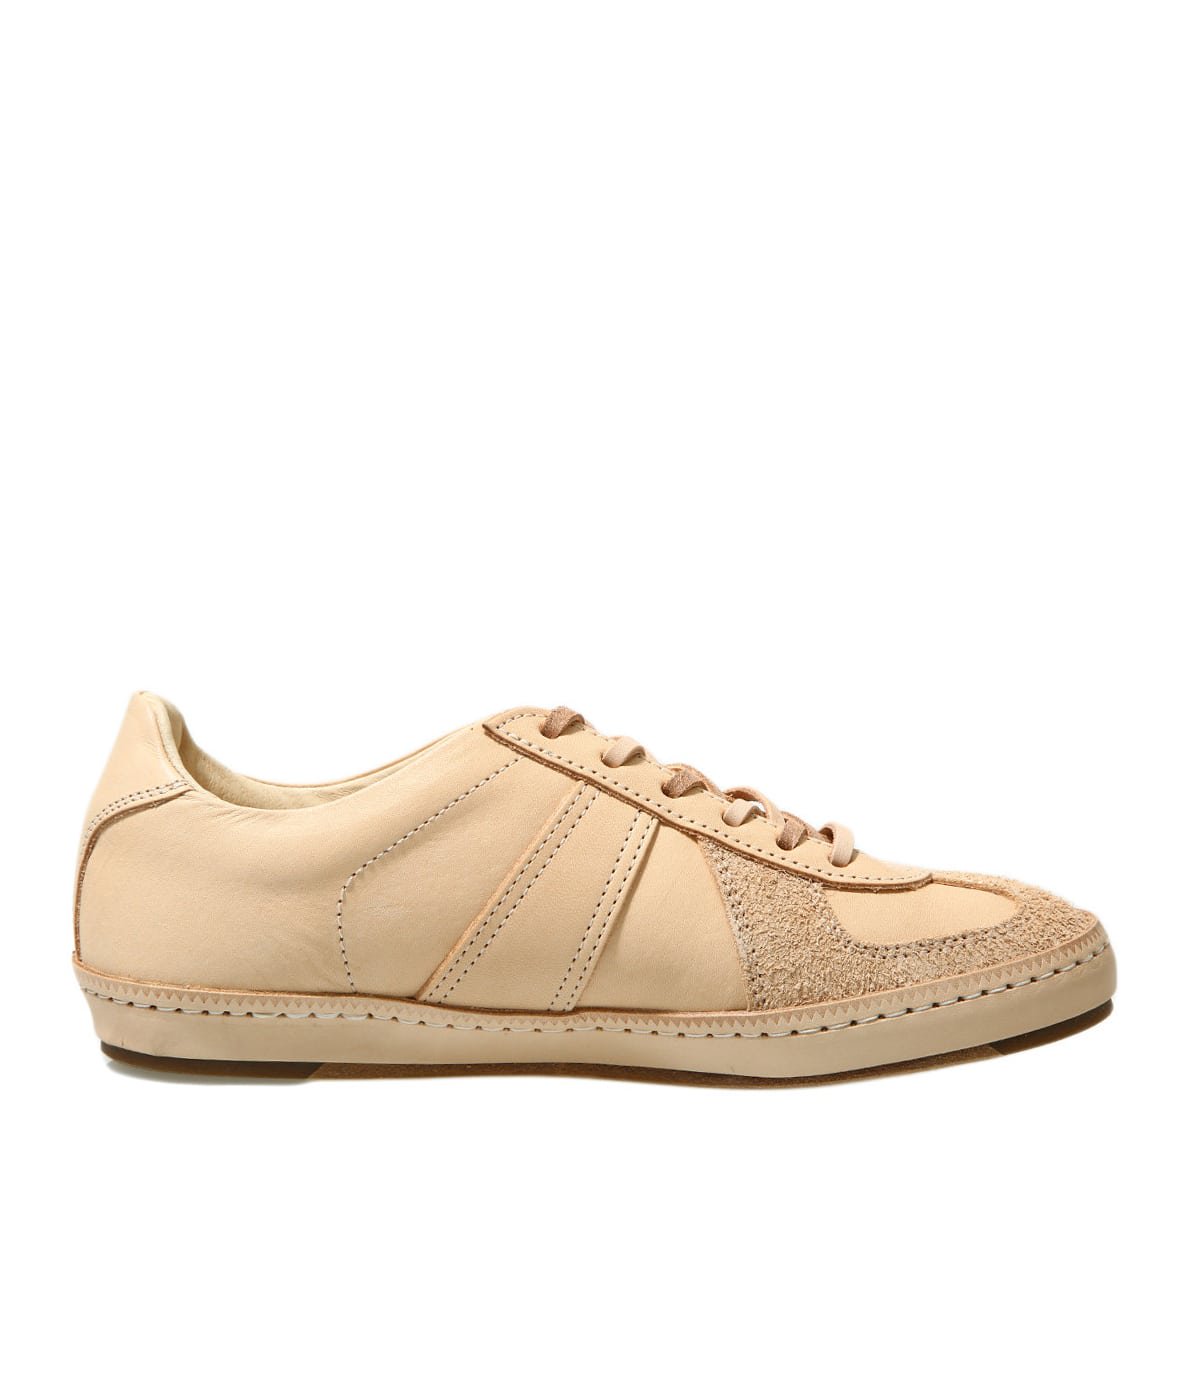 manual industrial products 05 | Hender Scheme(エンダースキーマ